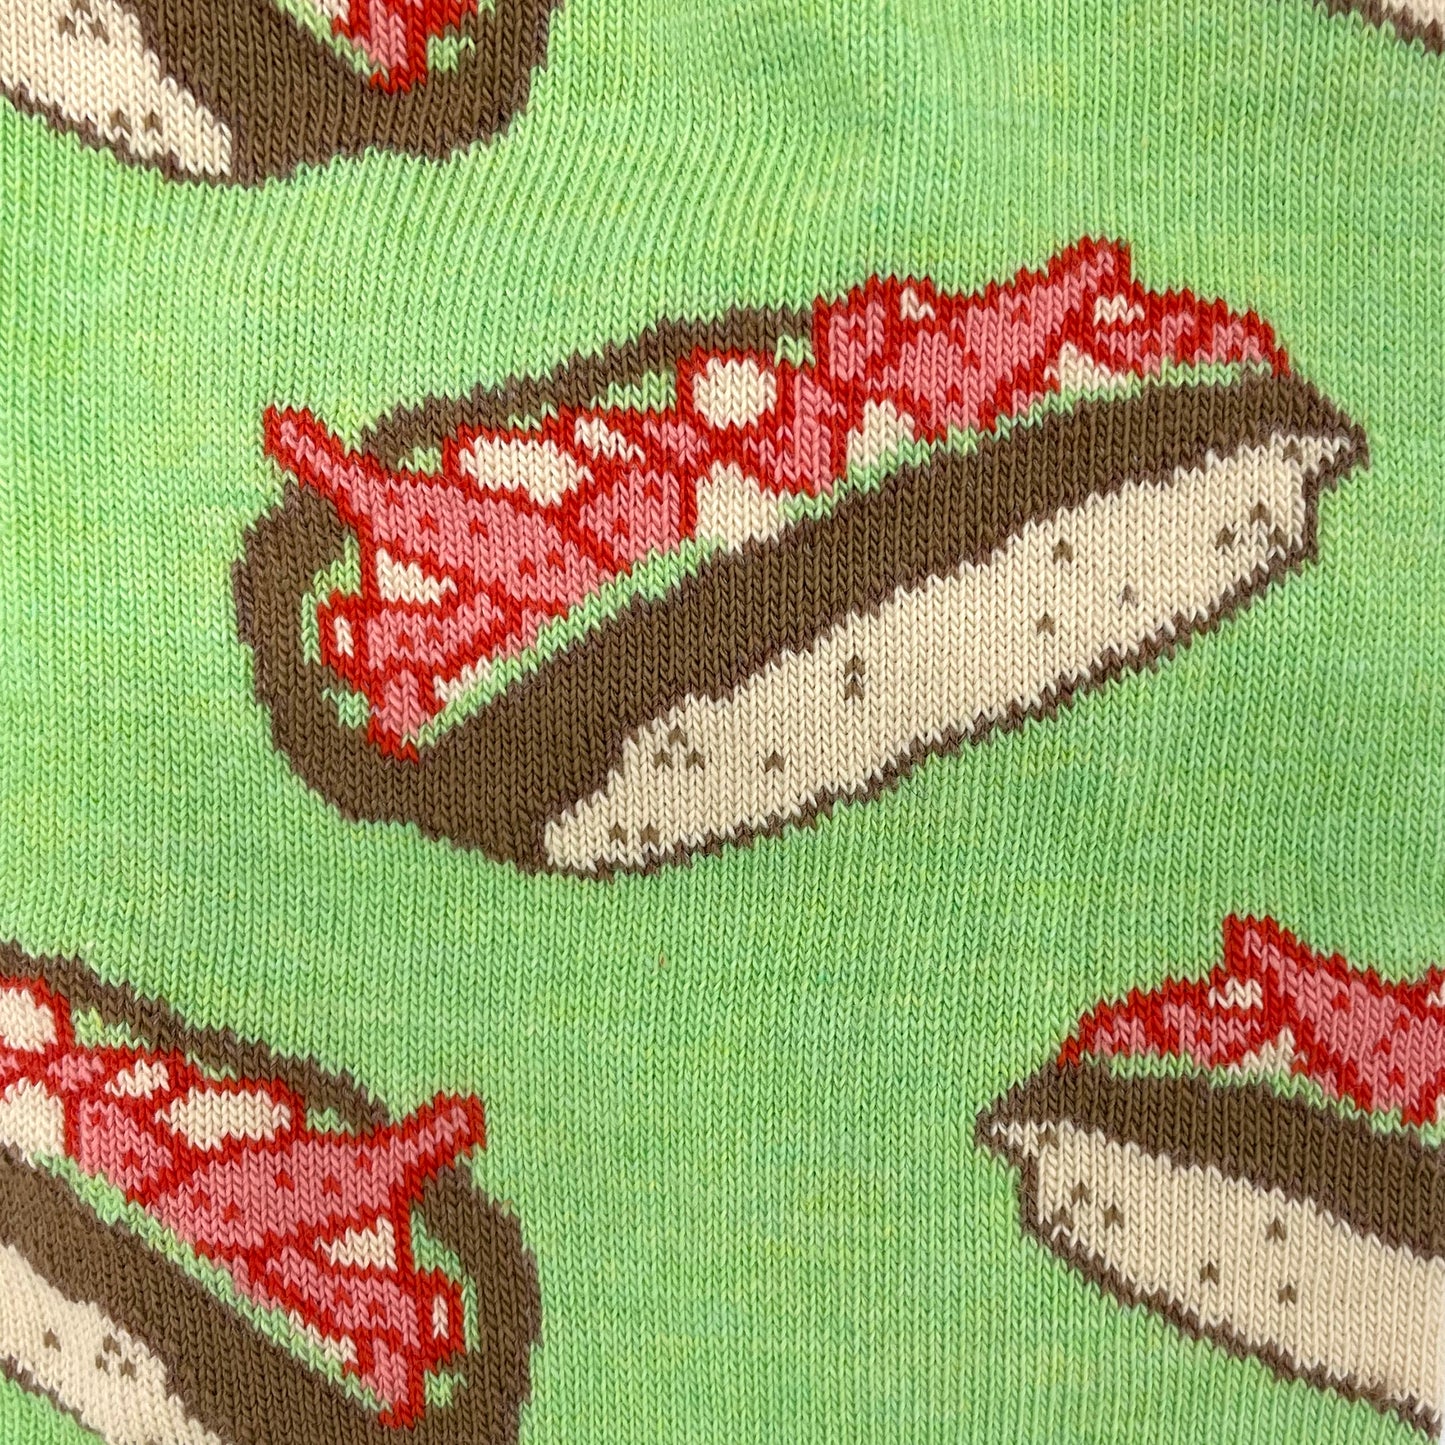 A close-up shot shows a lobster roll pattern woven into a green sock.